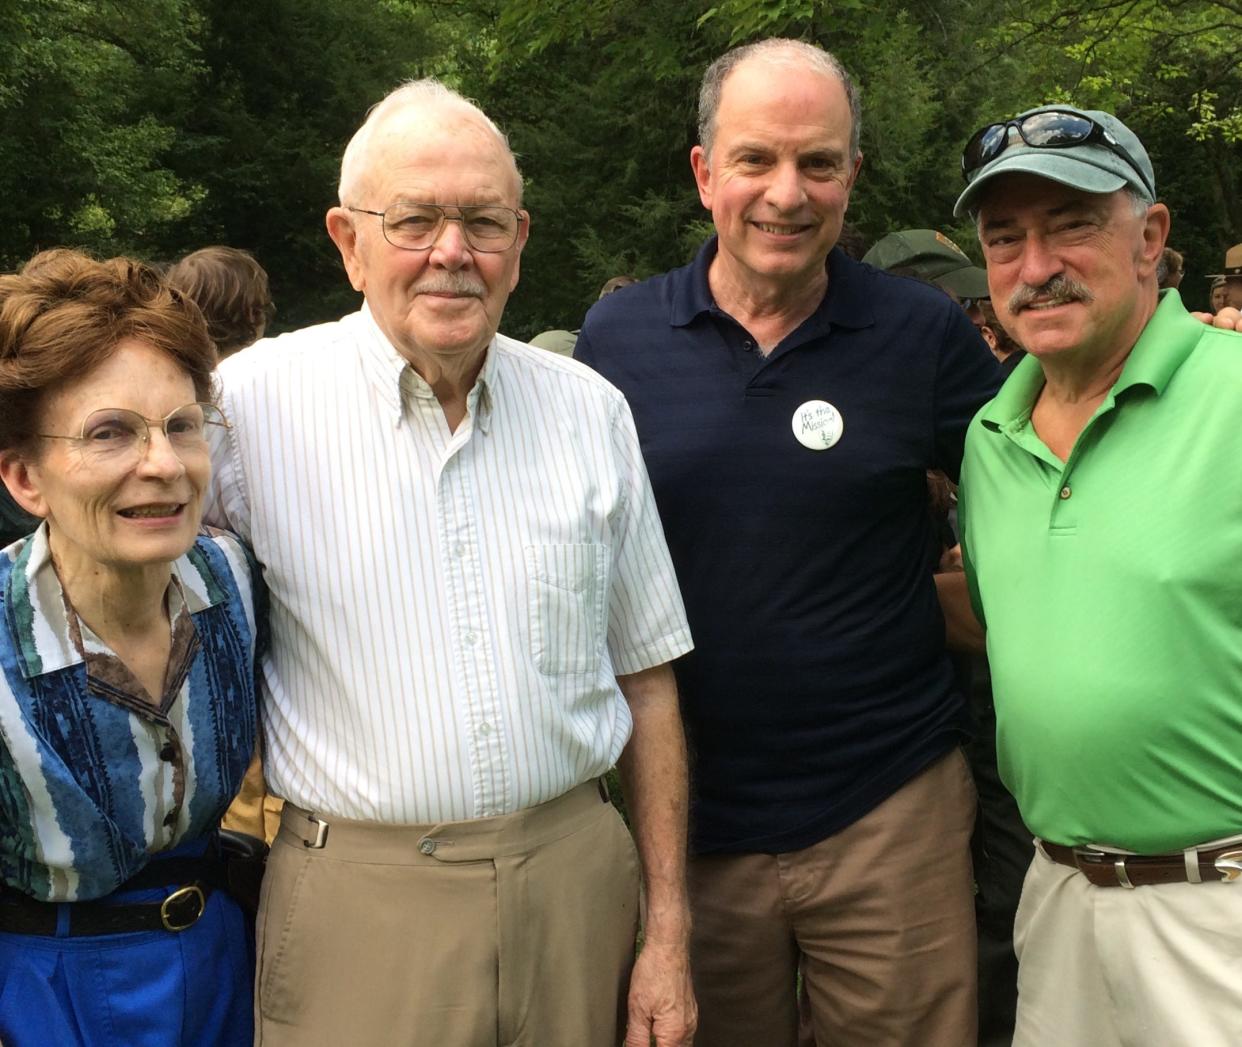 Randy Pope, second from left, was superintendent of the Great Smoky Mountains National Park and helped form Friends of the Smokies in 1993. He is shown here at a celebration of the 100th anniversary of the National Park Service in August 2016. His wife, Kathy, who died in 2018, is to his right. Others in the photo to Pope's left are Don Barger, senior regional director, National Parks Conservation Association, and Doug Fry (with cap), son of another former park superintendent, George W. Fry.